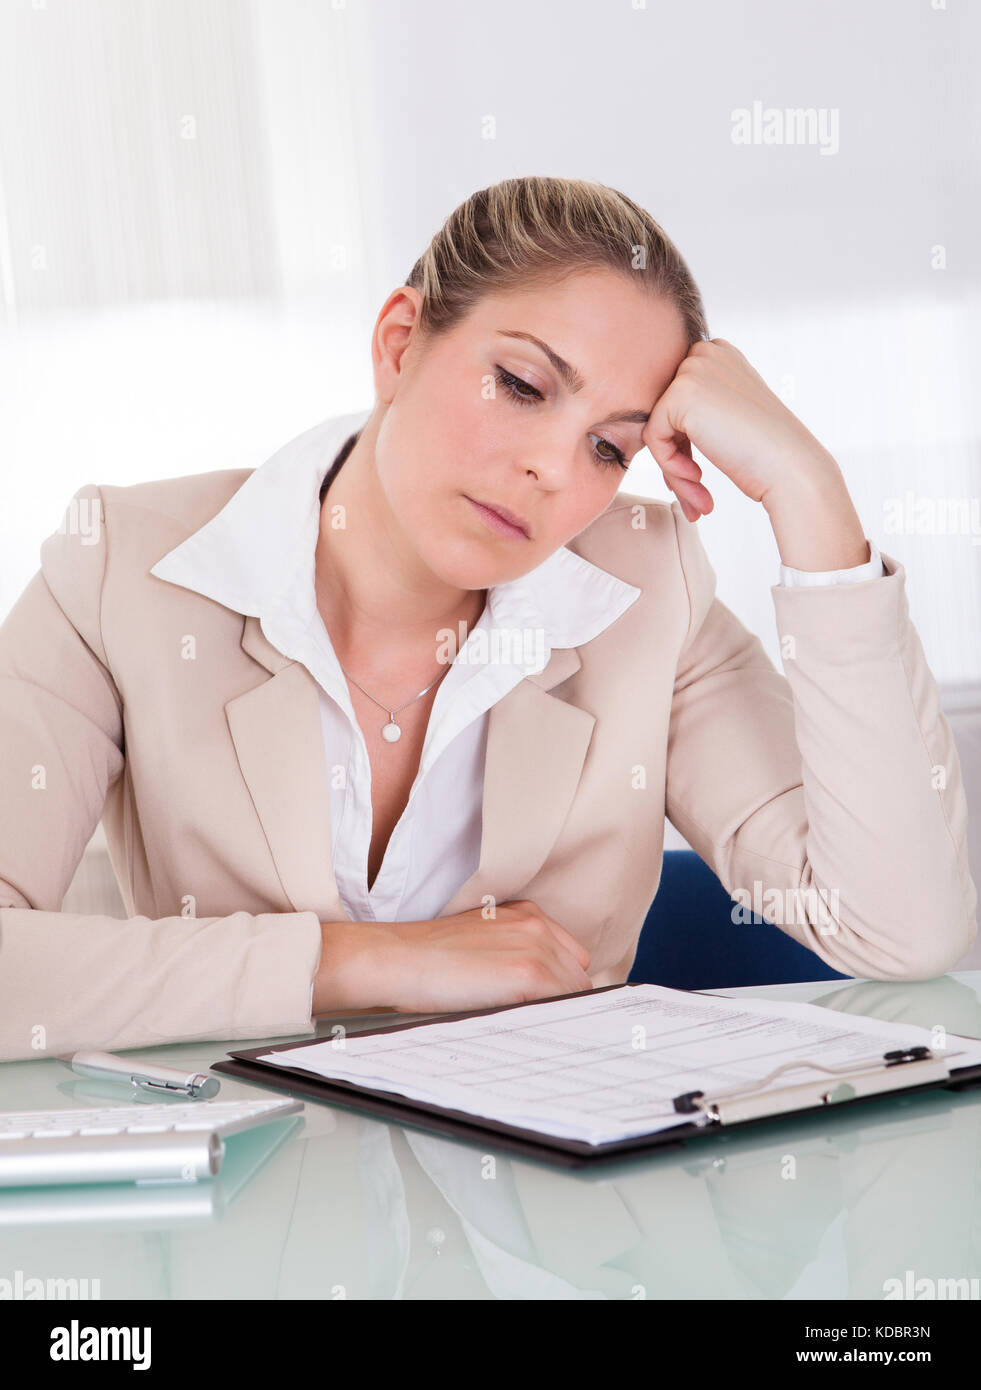 Stressful business woman working in the office Stock Photo